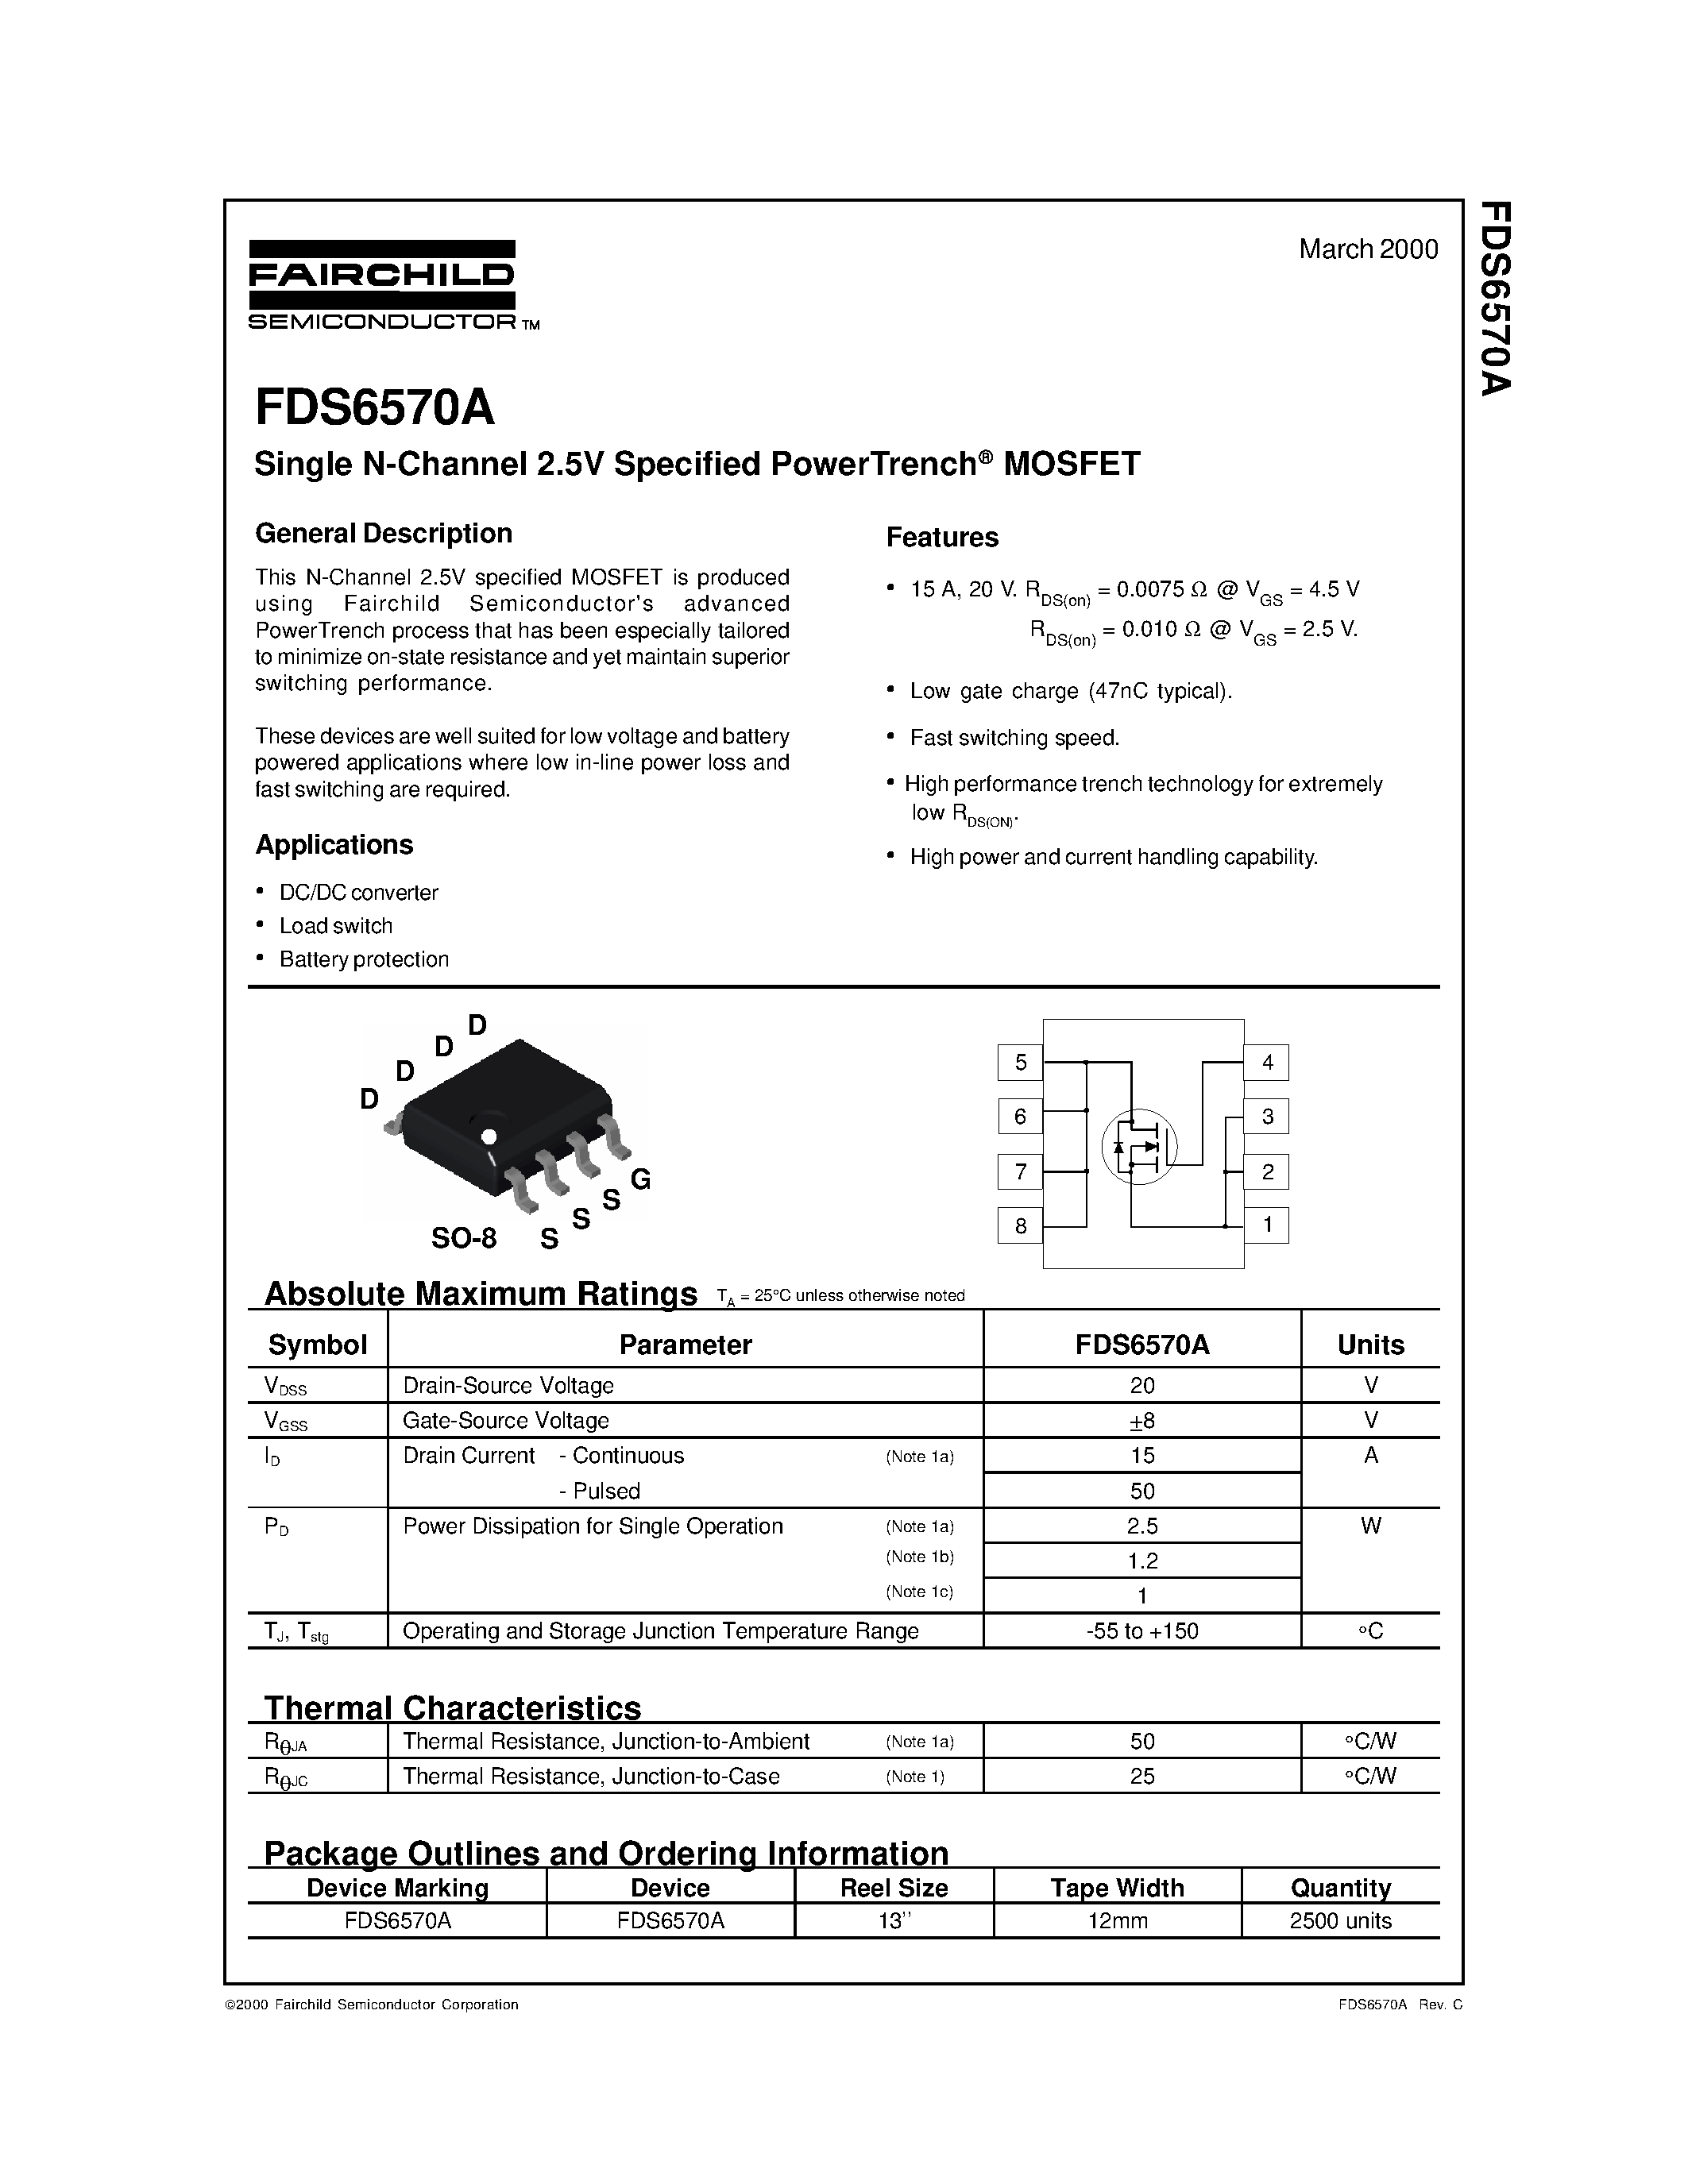 Даташит FDS6570A - Single N-Channel 2.5V Specified PowerTrench MOSFET страница 1